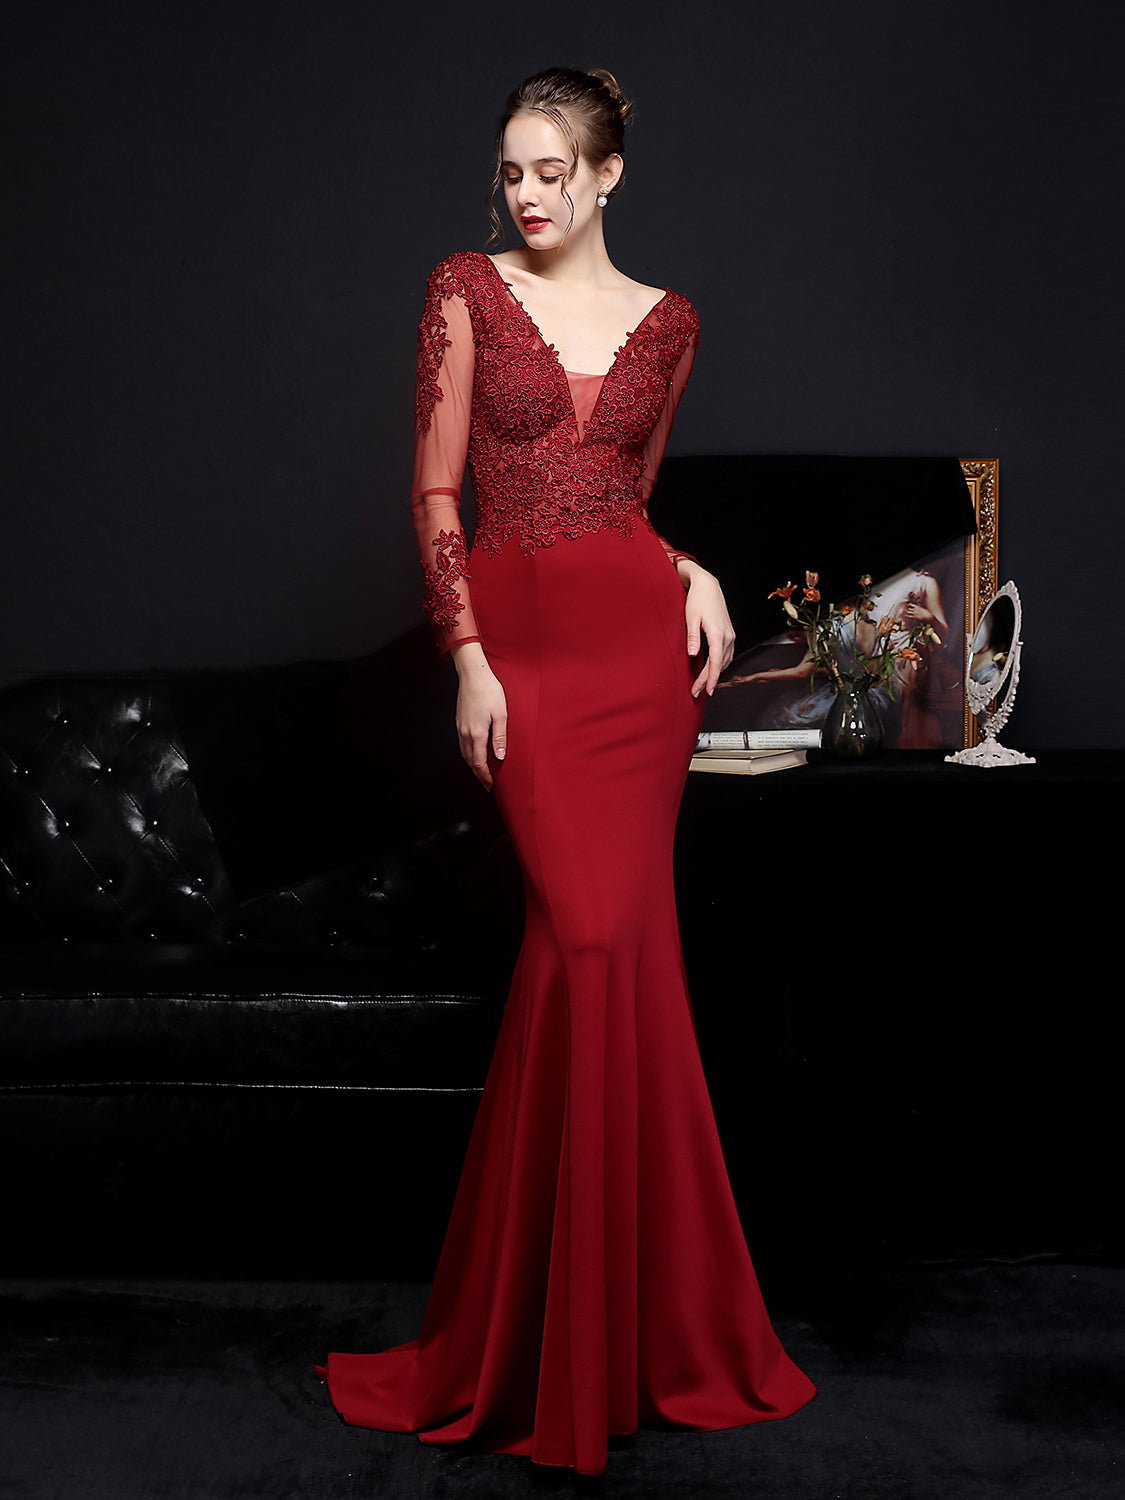 Lace long sleeved evening dress